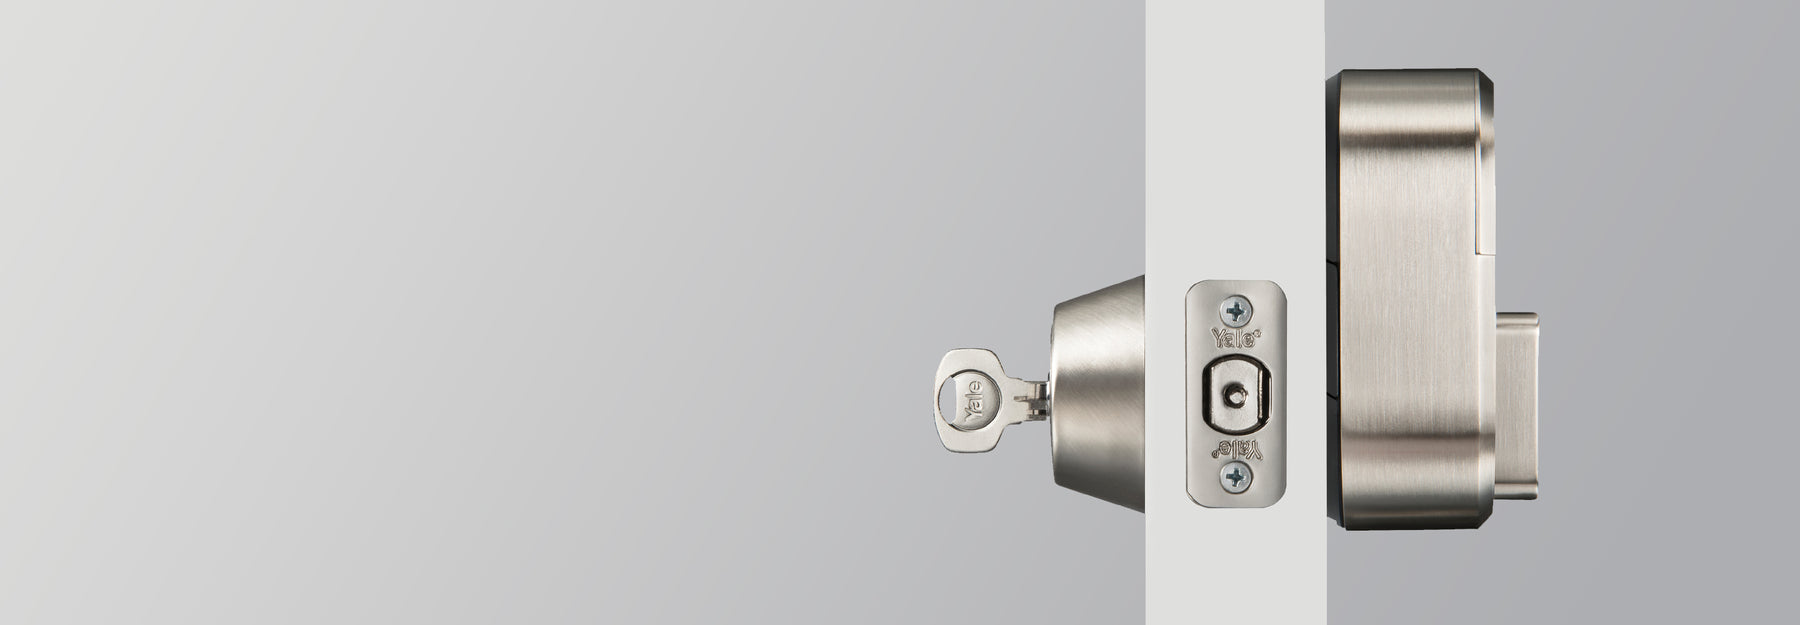 Side view of a yale lock installed on a door